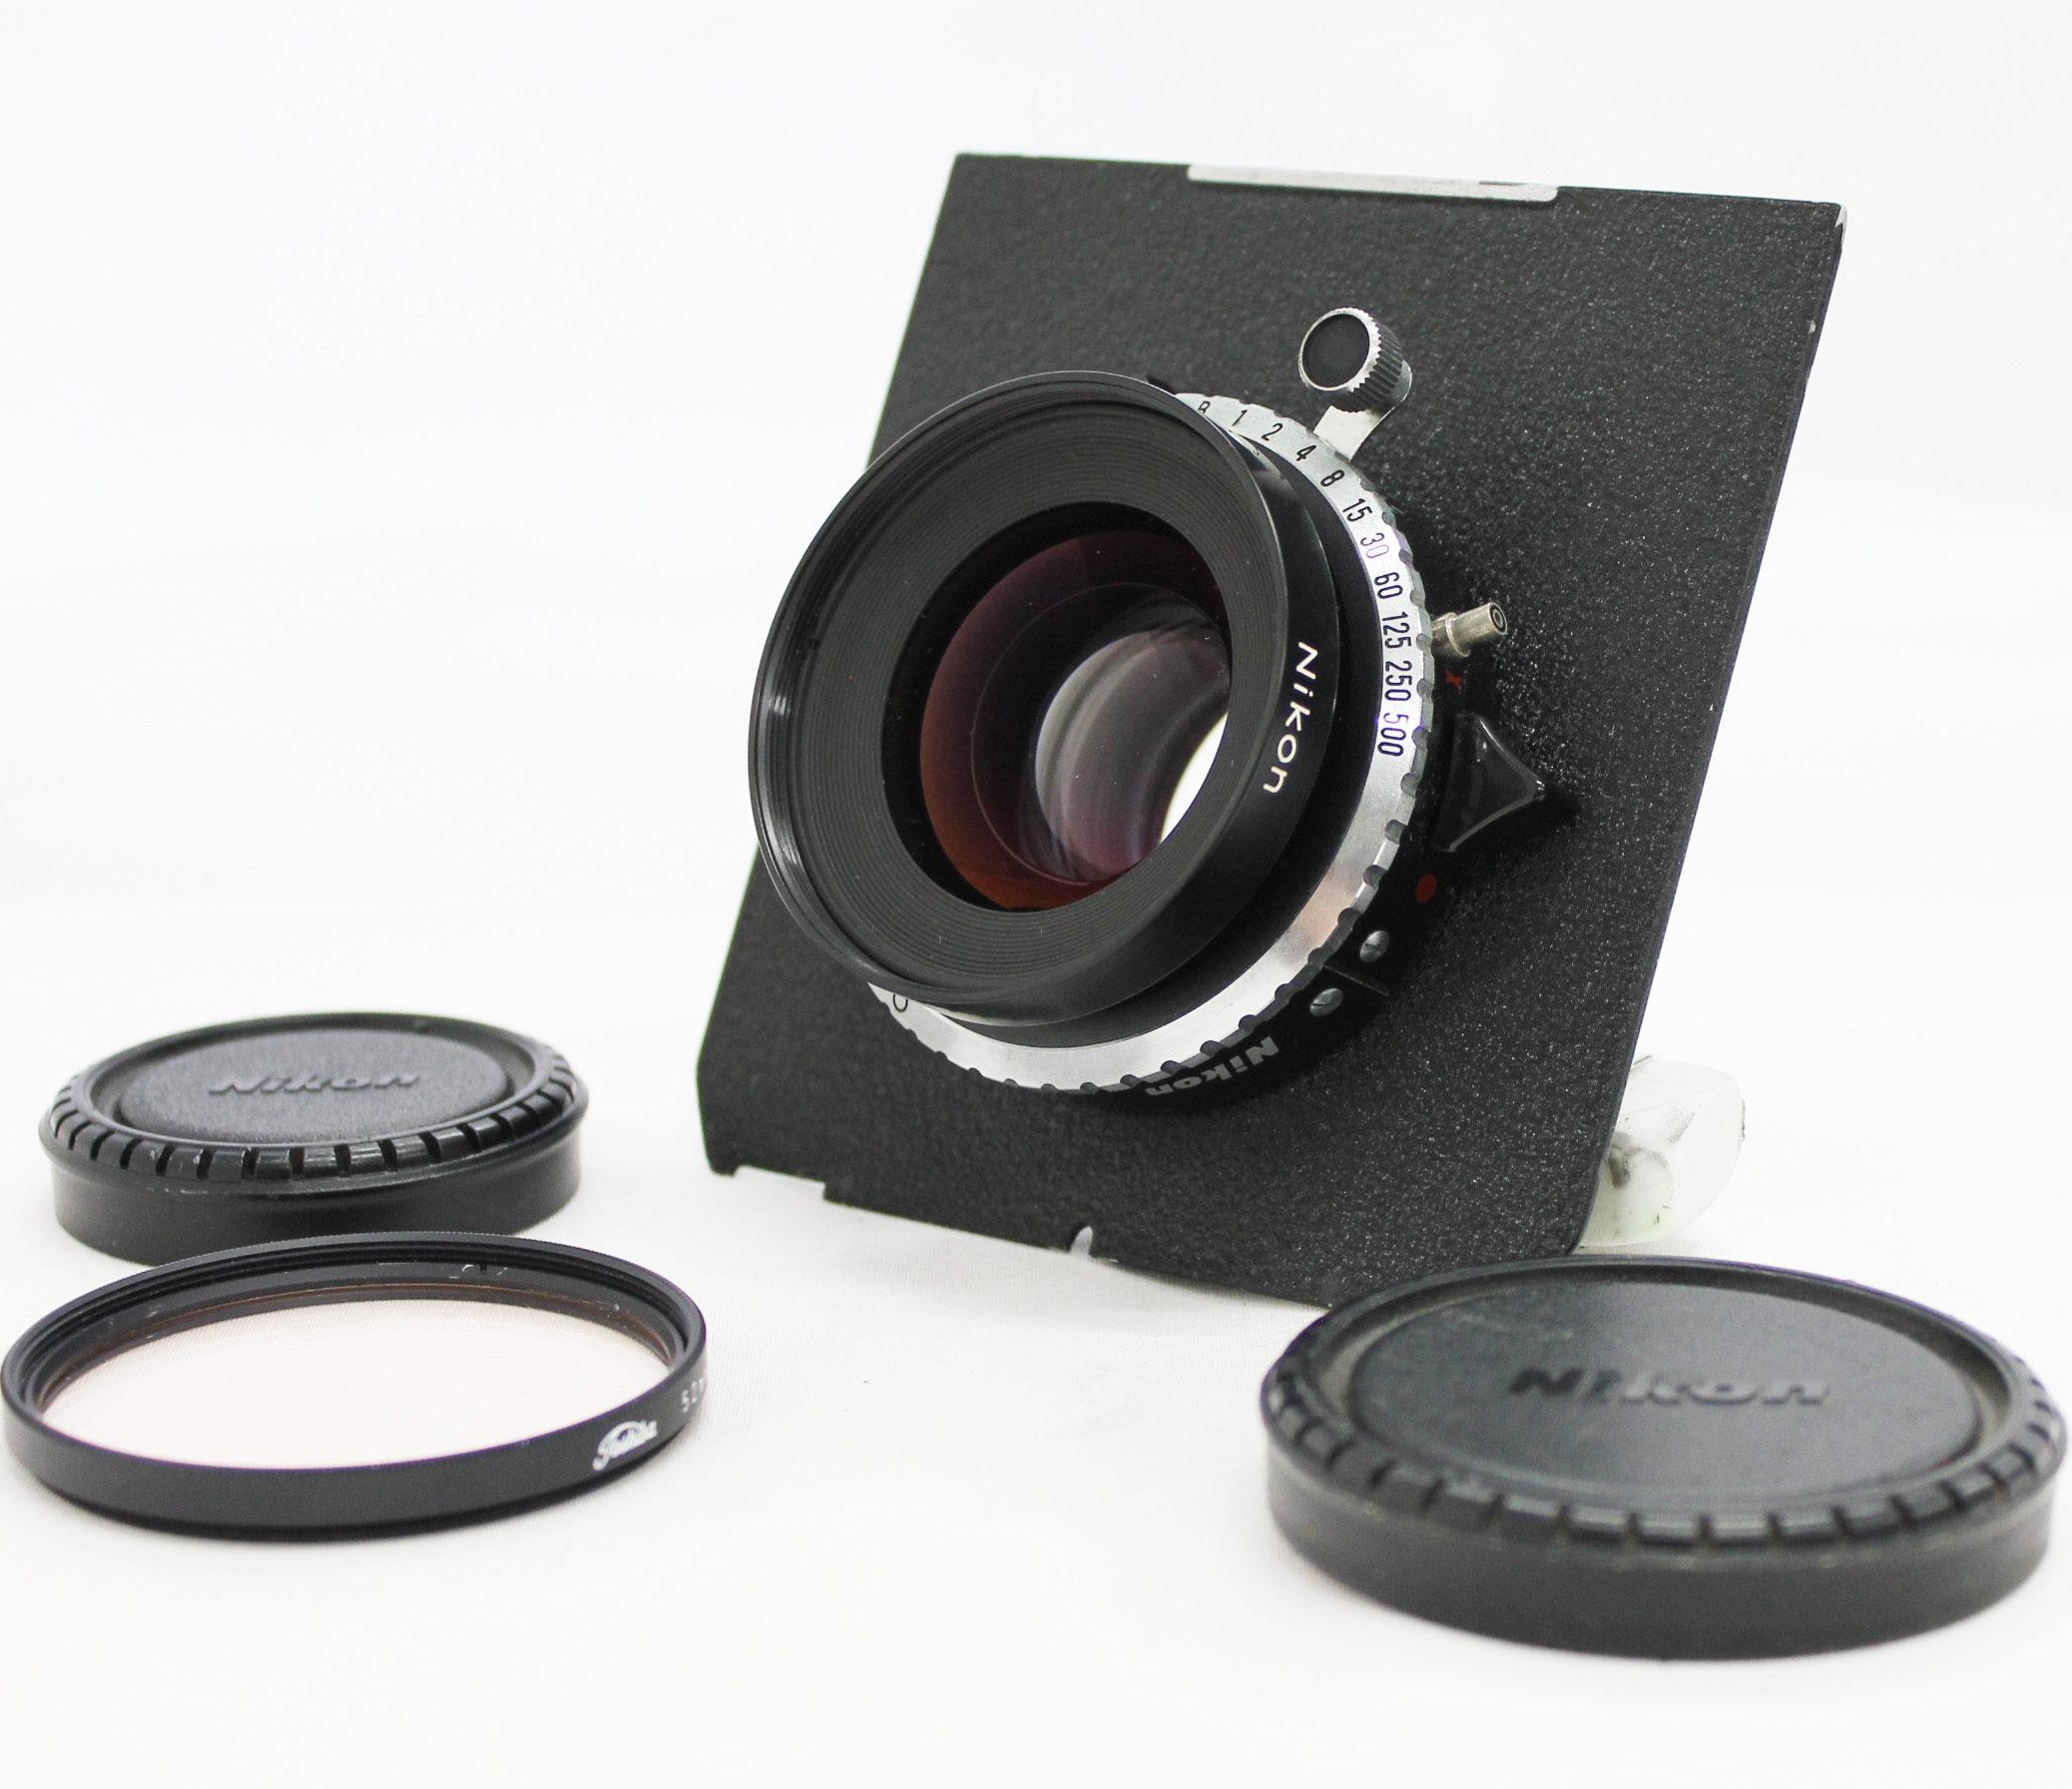 Japan Used Camera Shop | [Near Mint] Nikon Nikkor-W 135mm F/5.6 4x5 Lens with Copal 0 Shutter from Japan